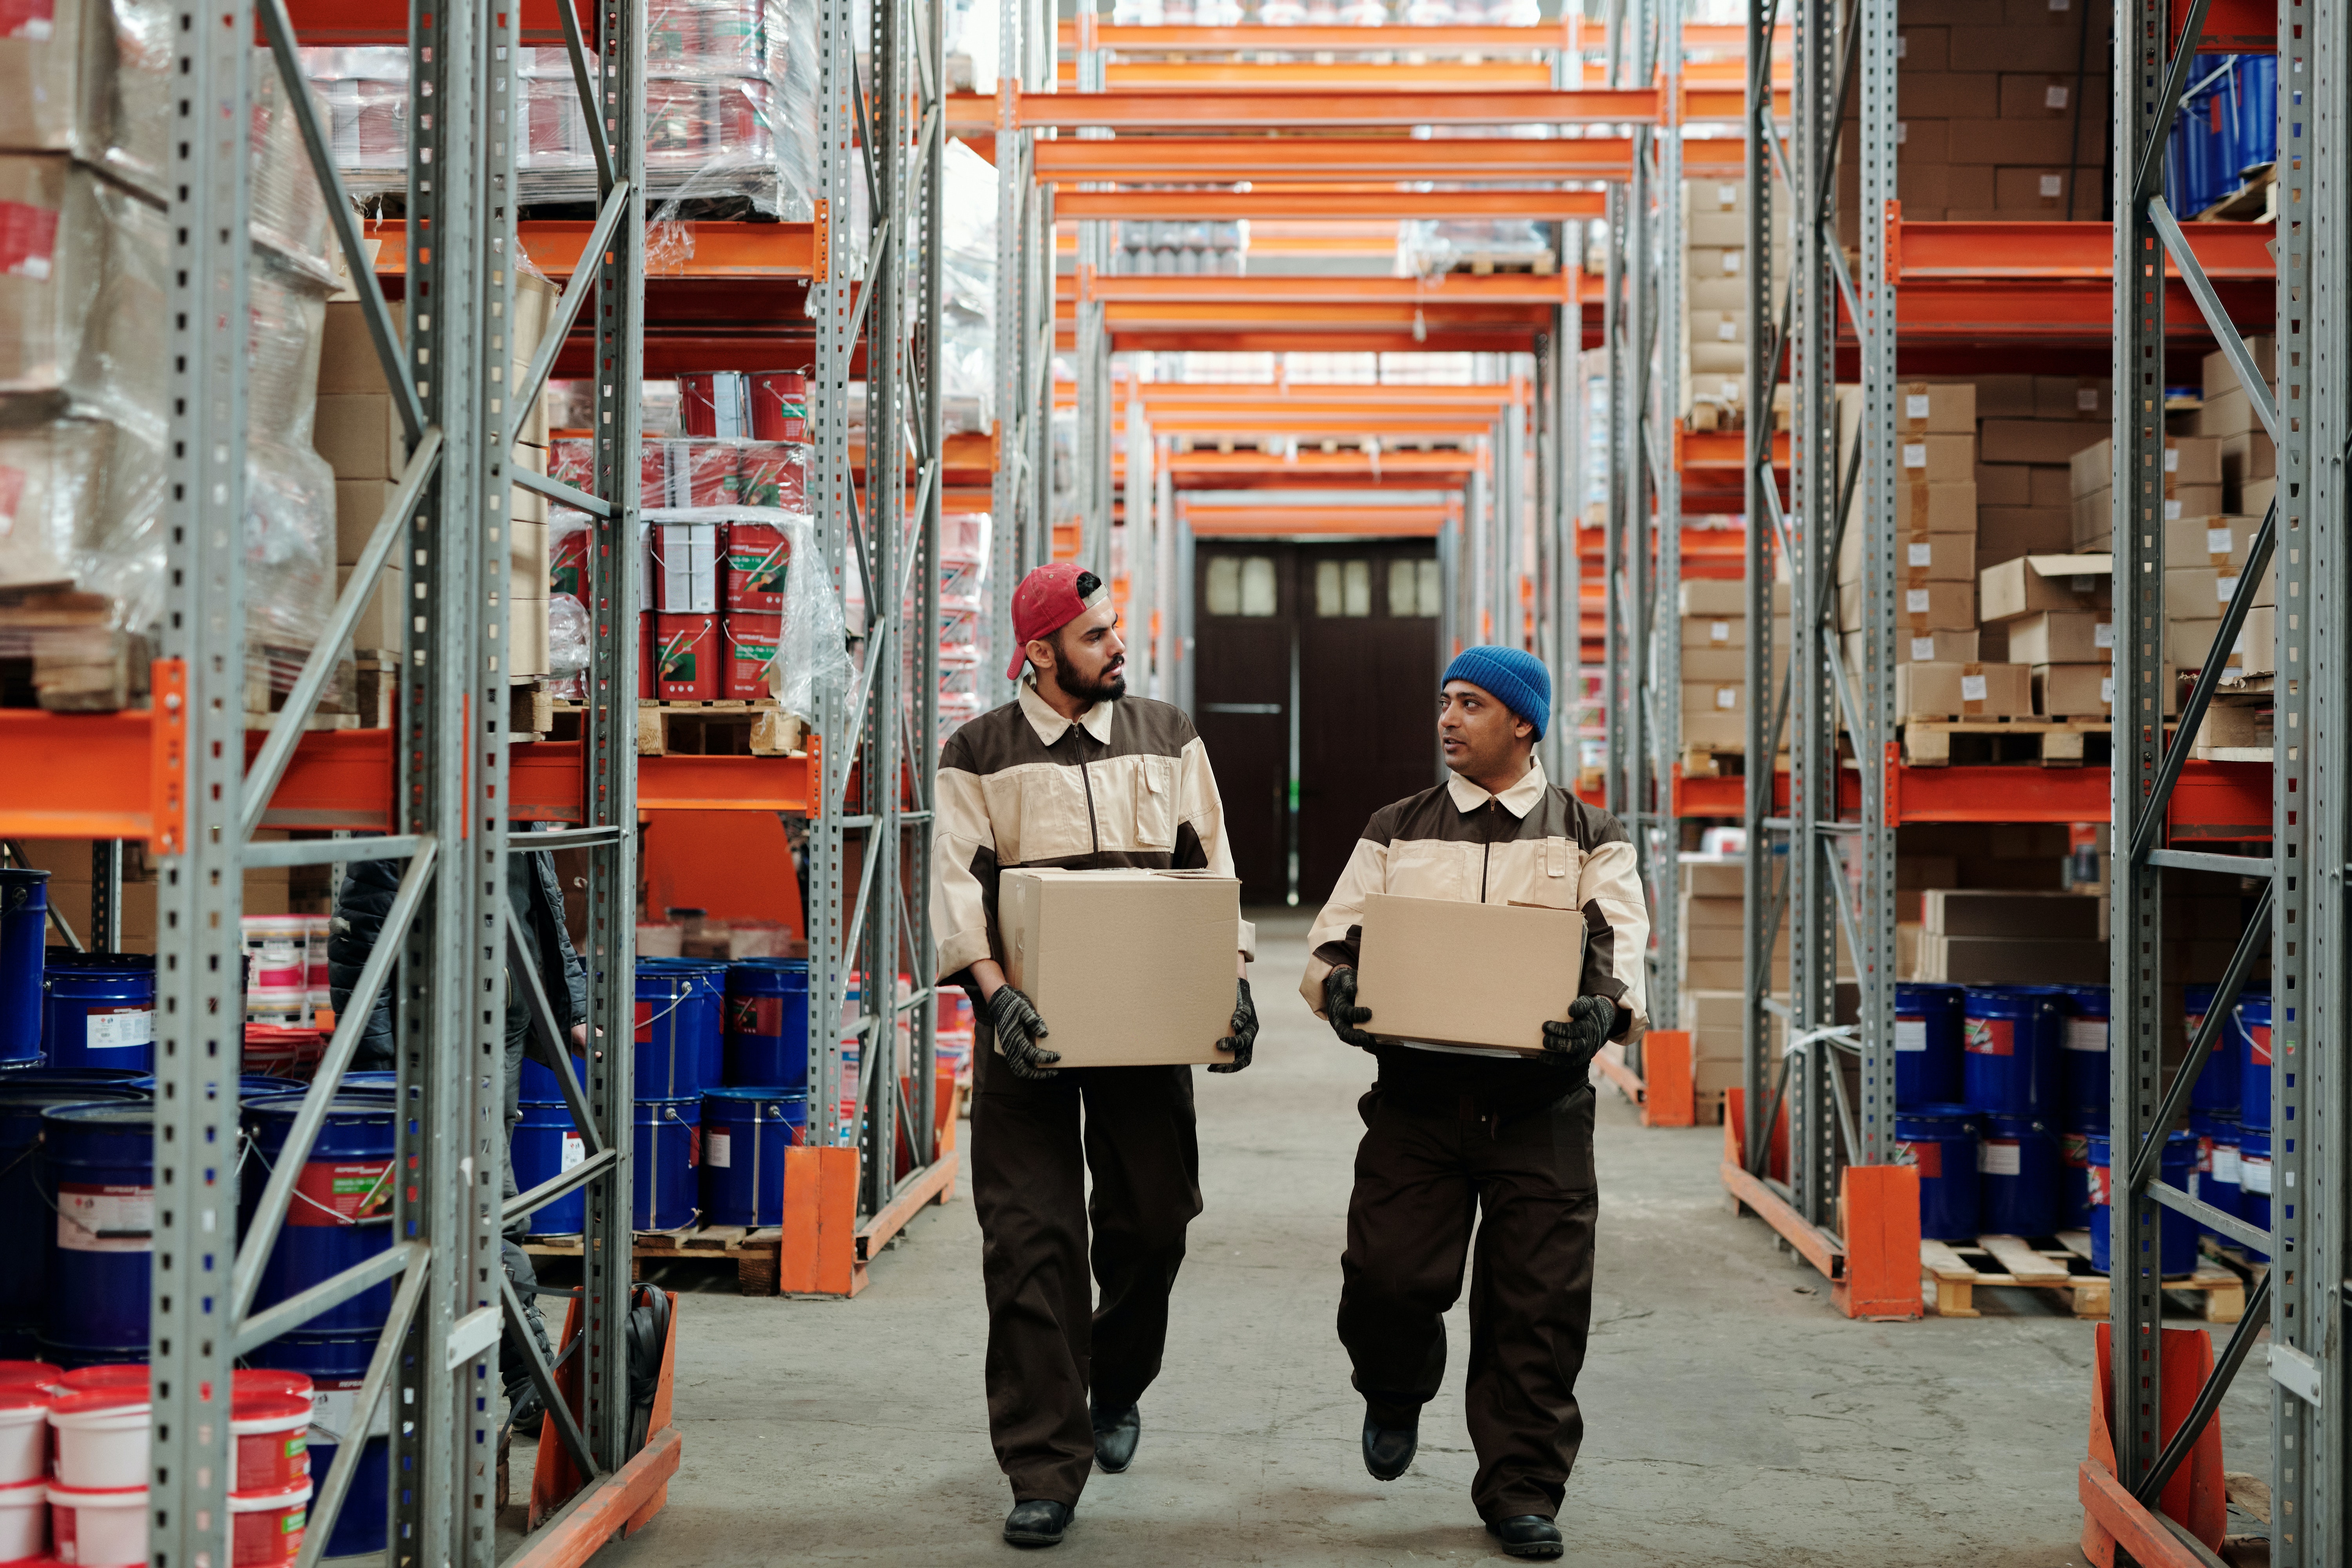 Two people carrying boxes in a warehouse